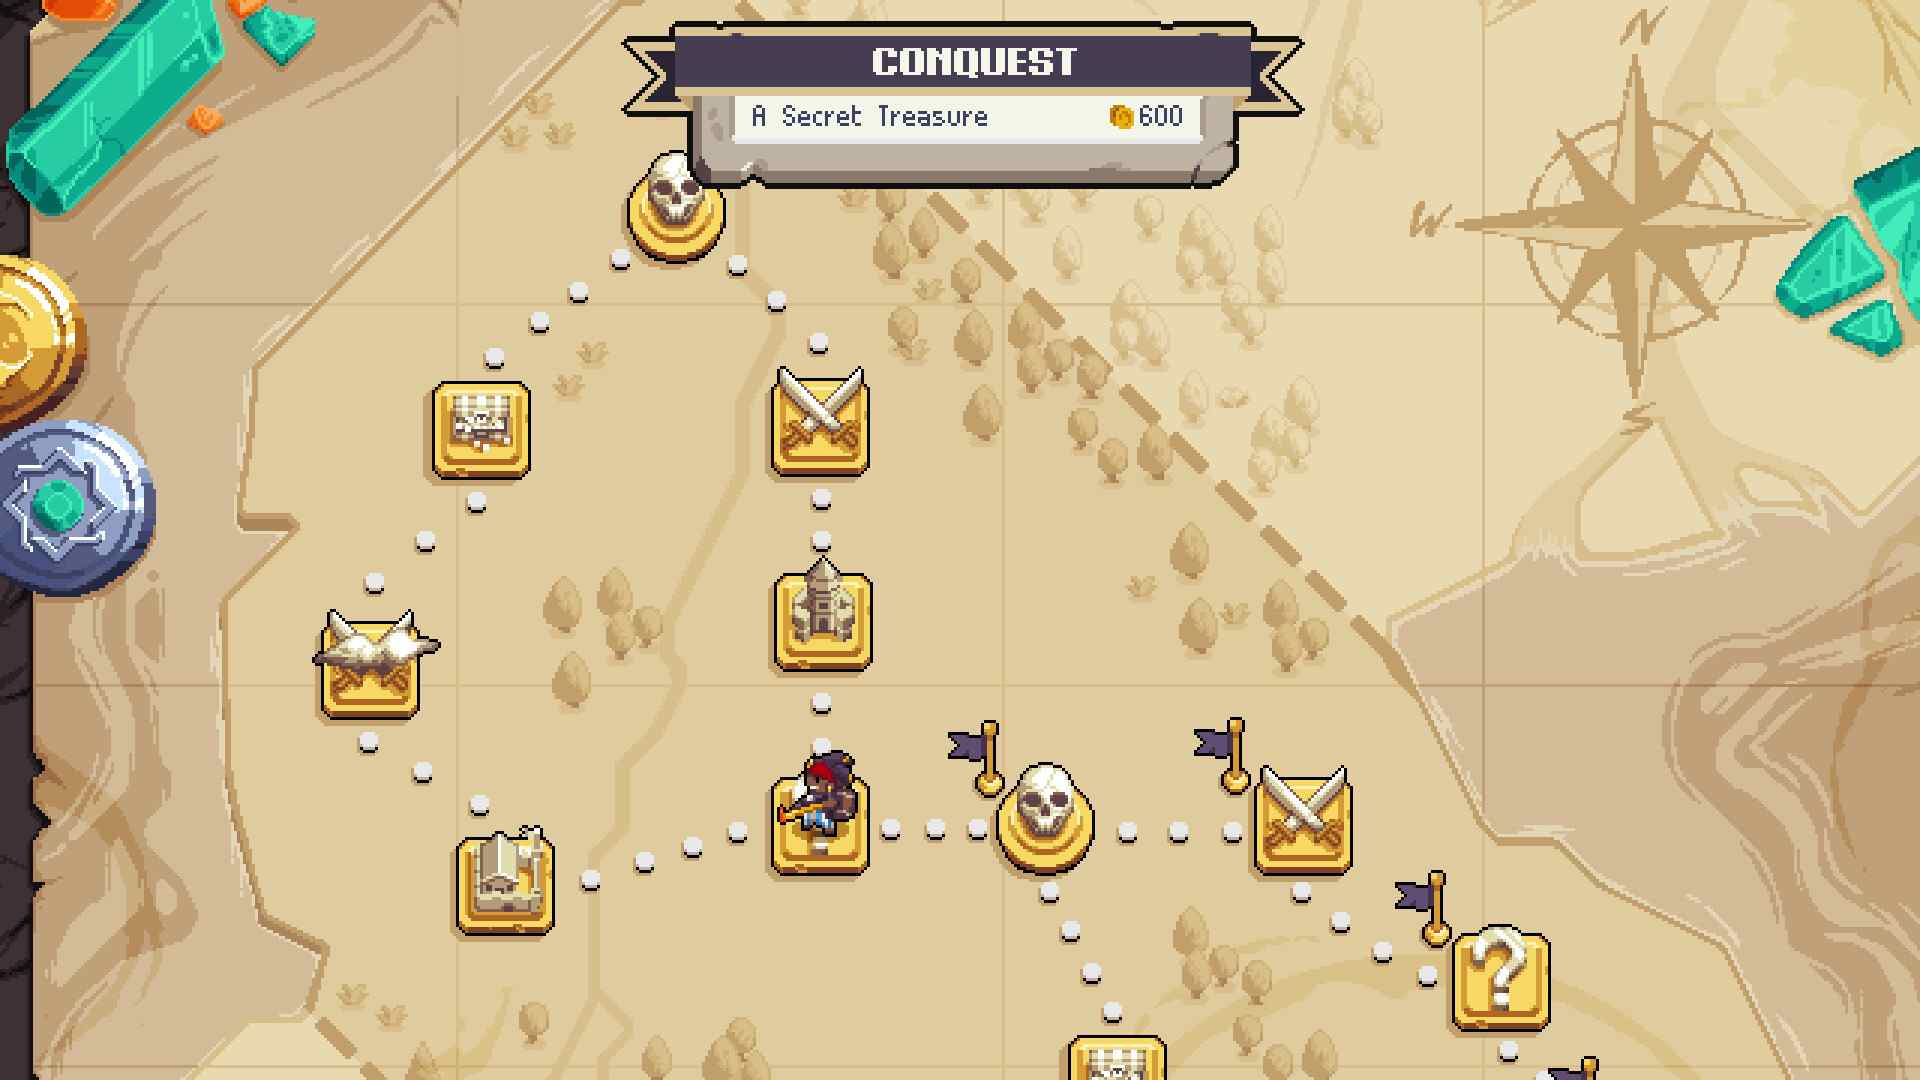 The Conquest Mode map from Wargroove 2